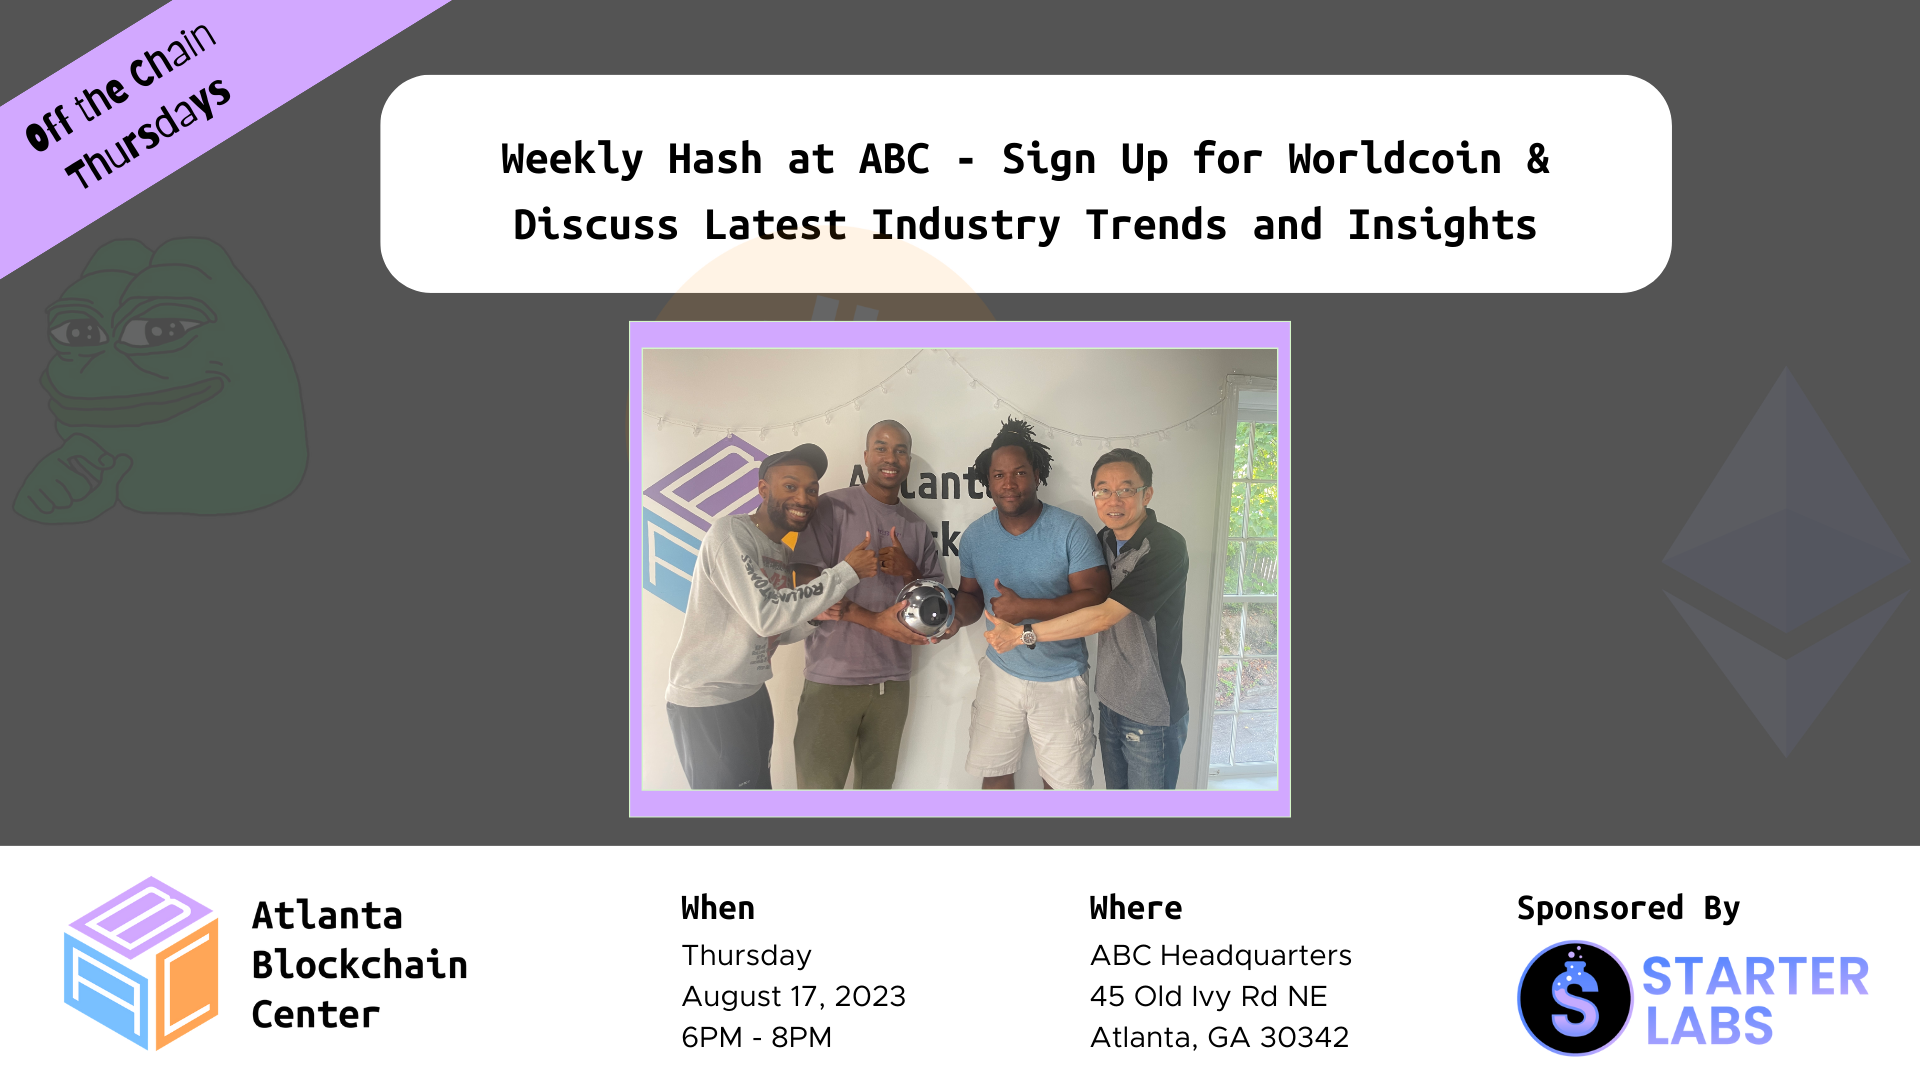 Weekly Hash @ABC – Sign Up for Worldcoin, Discuss Latest Trends & Insights